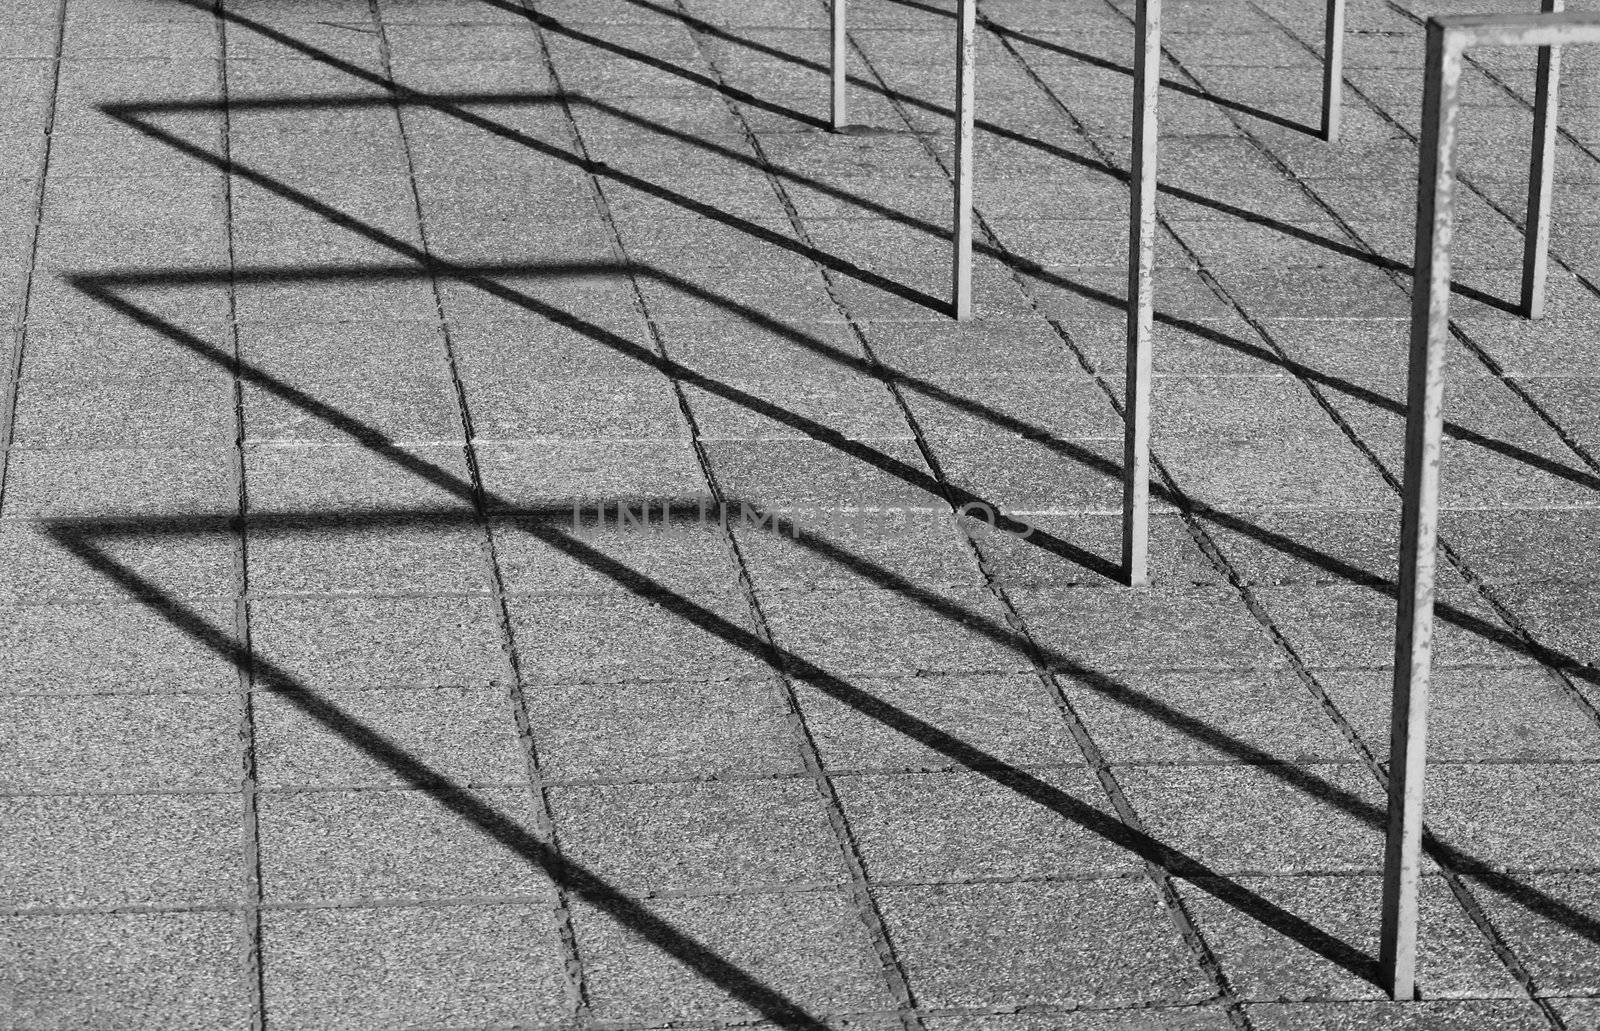 Empty bicycle stands are throwing long shadows on a very late afternoon.